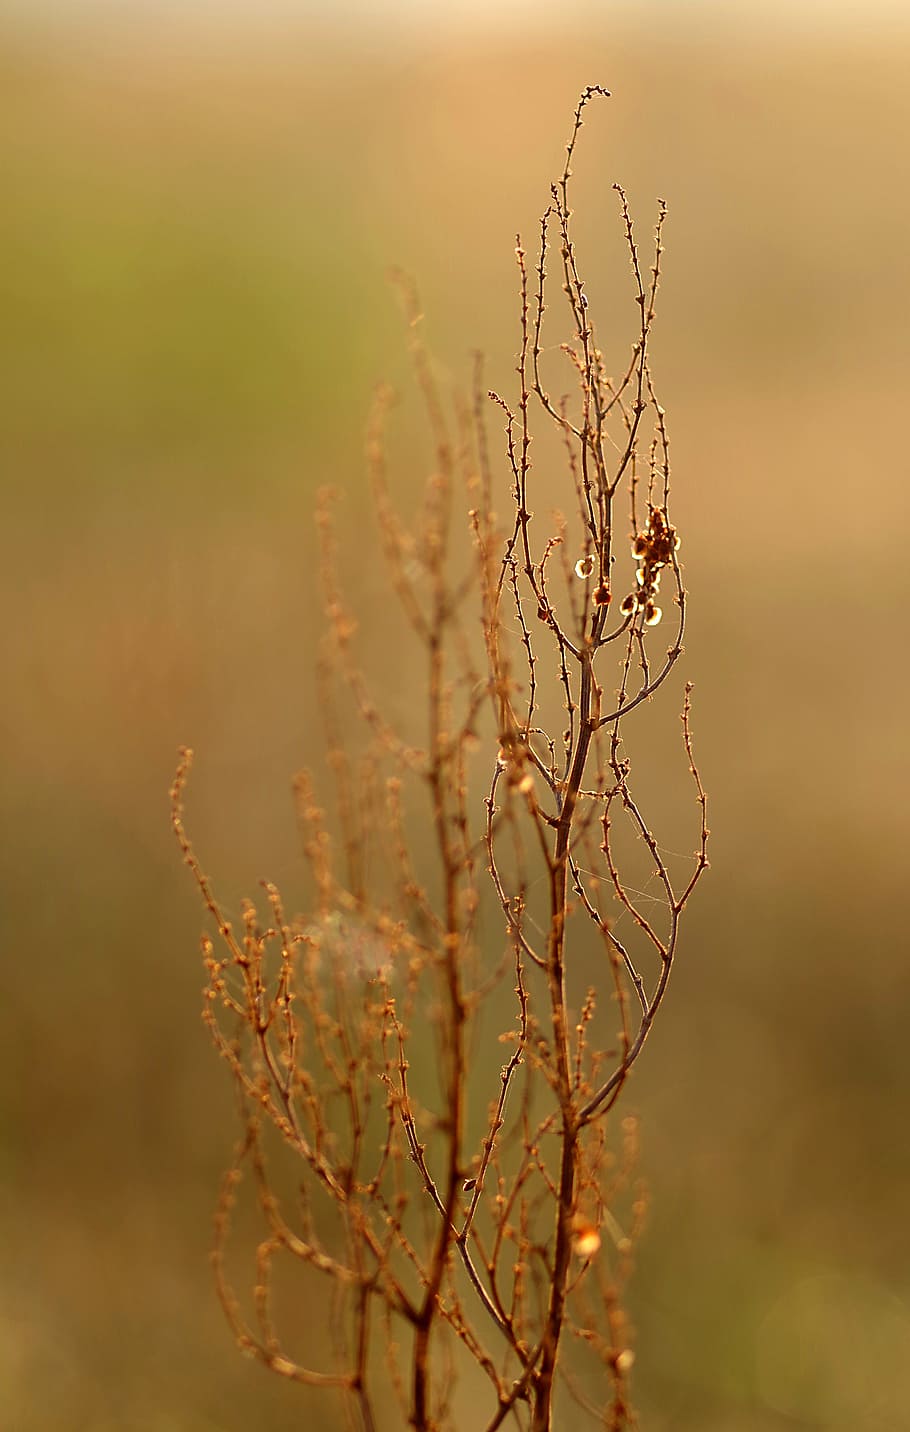 autumn, meadow, grass, dry, plant, sunrise, glow, nature, dry plants, spider's web